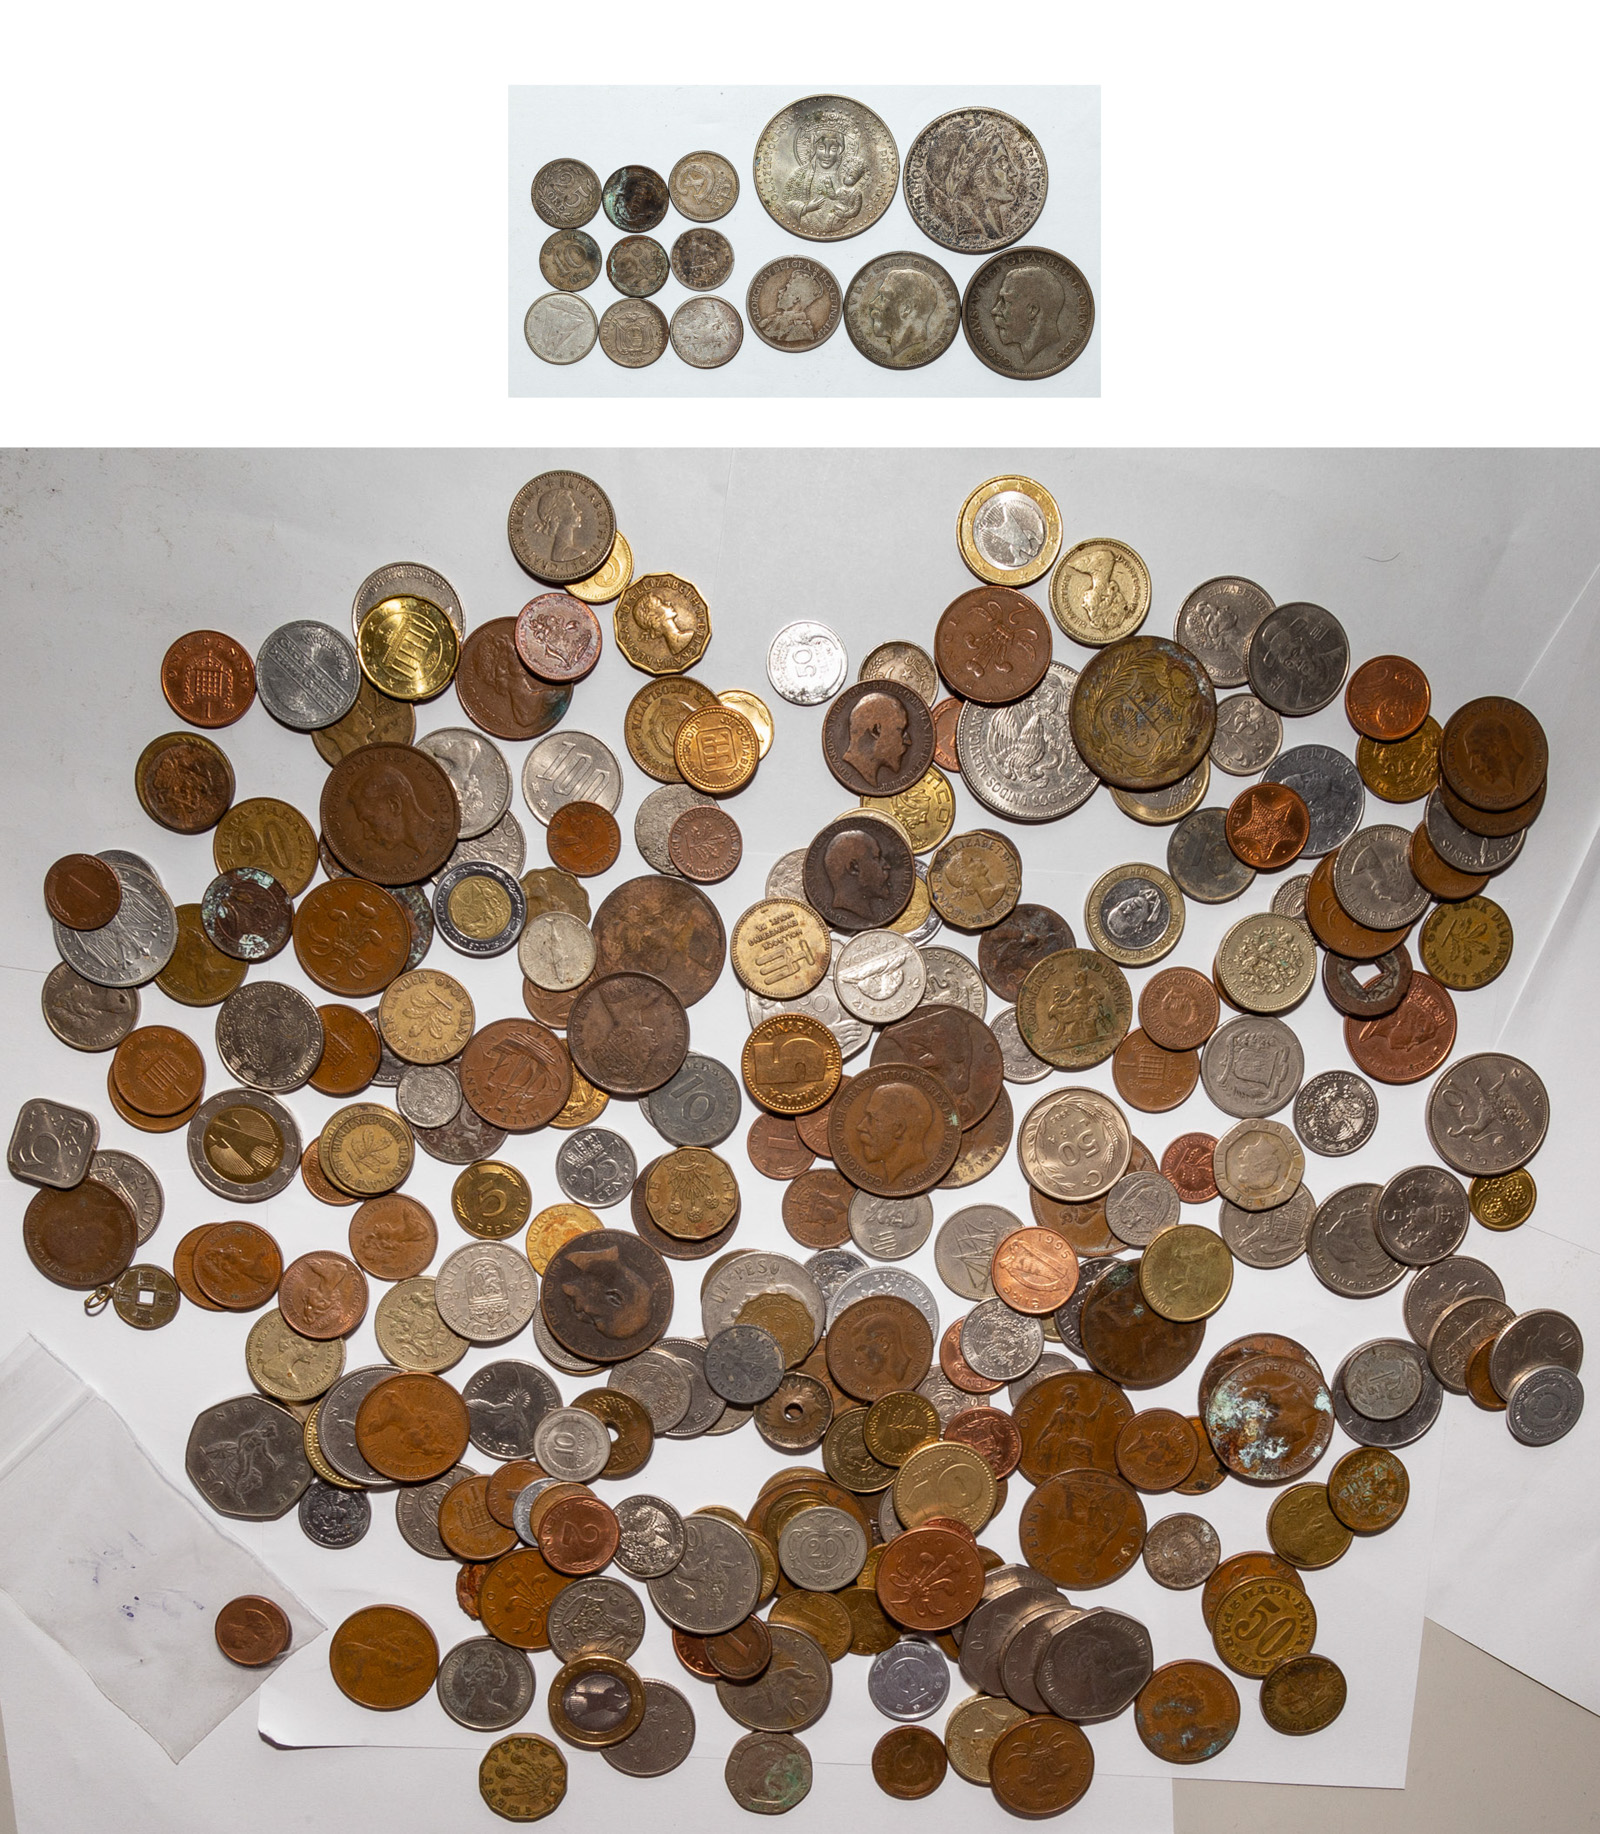 SEVERAL HUNDRED WORLD COINS WITH 338bec